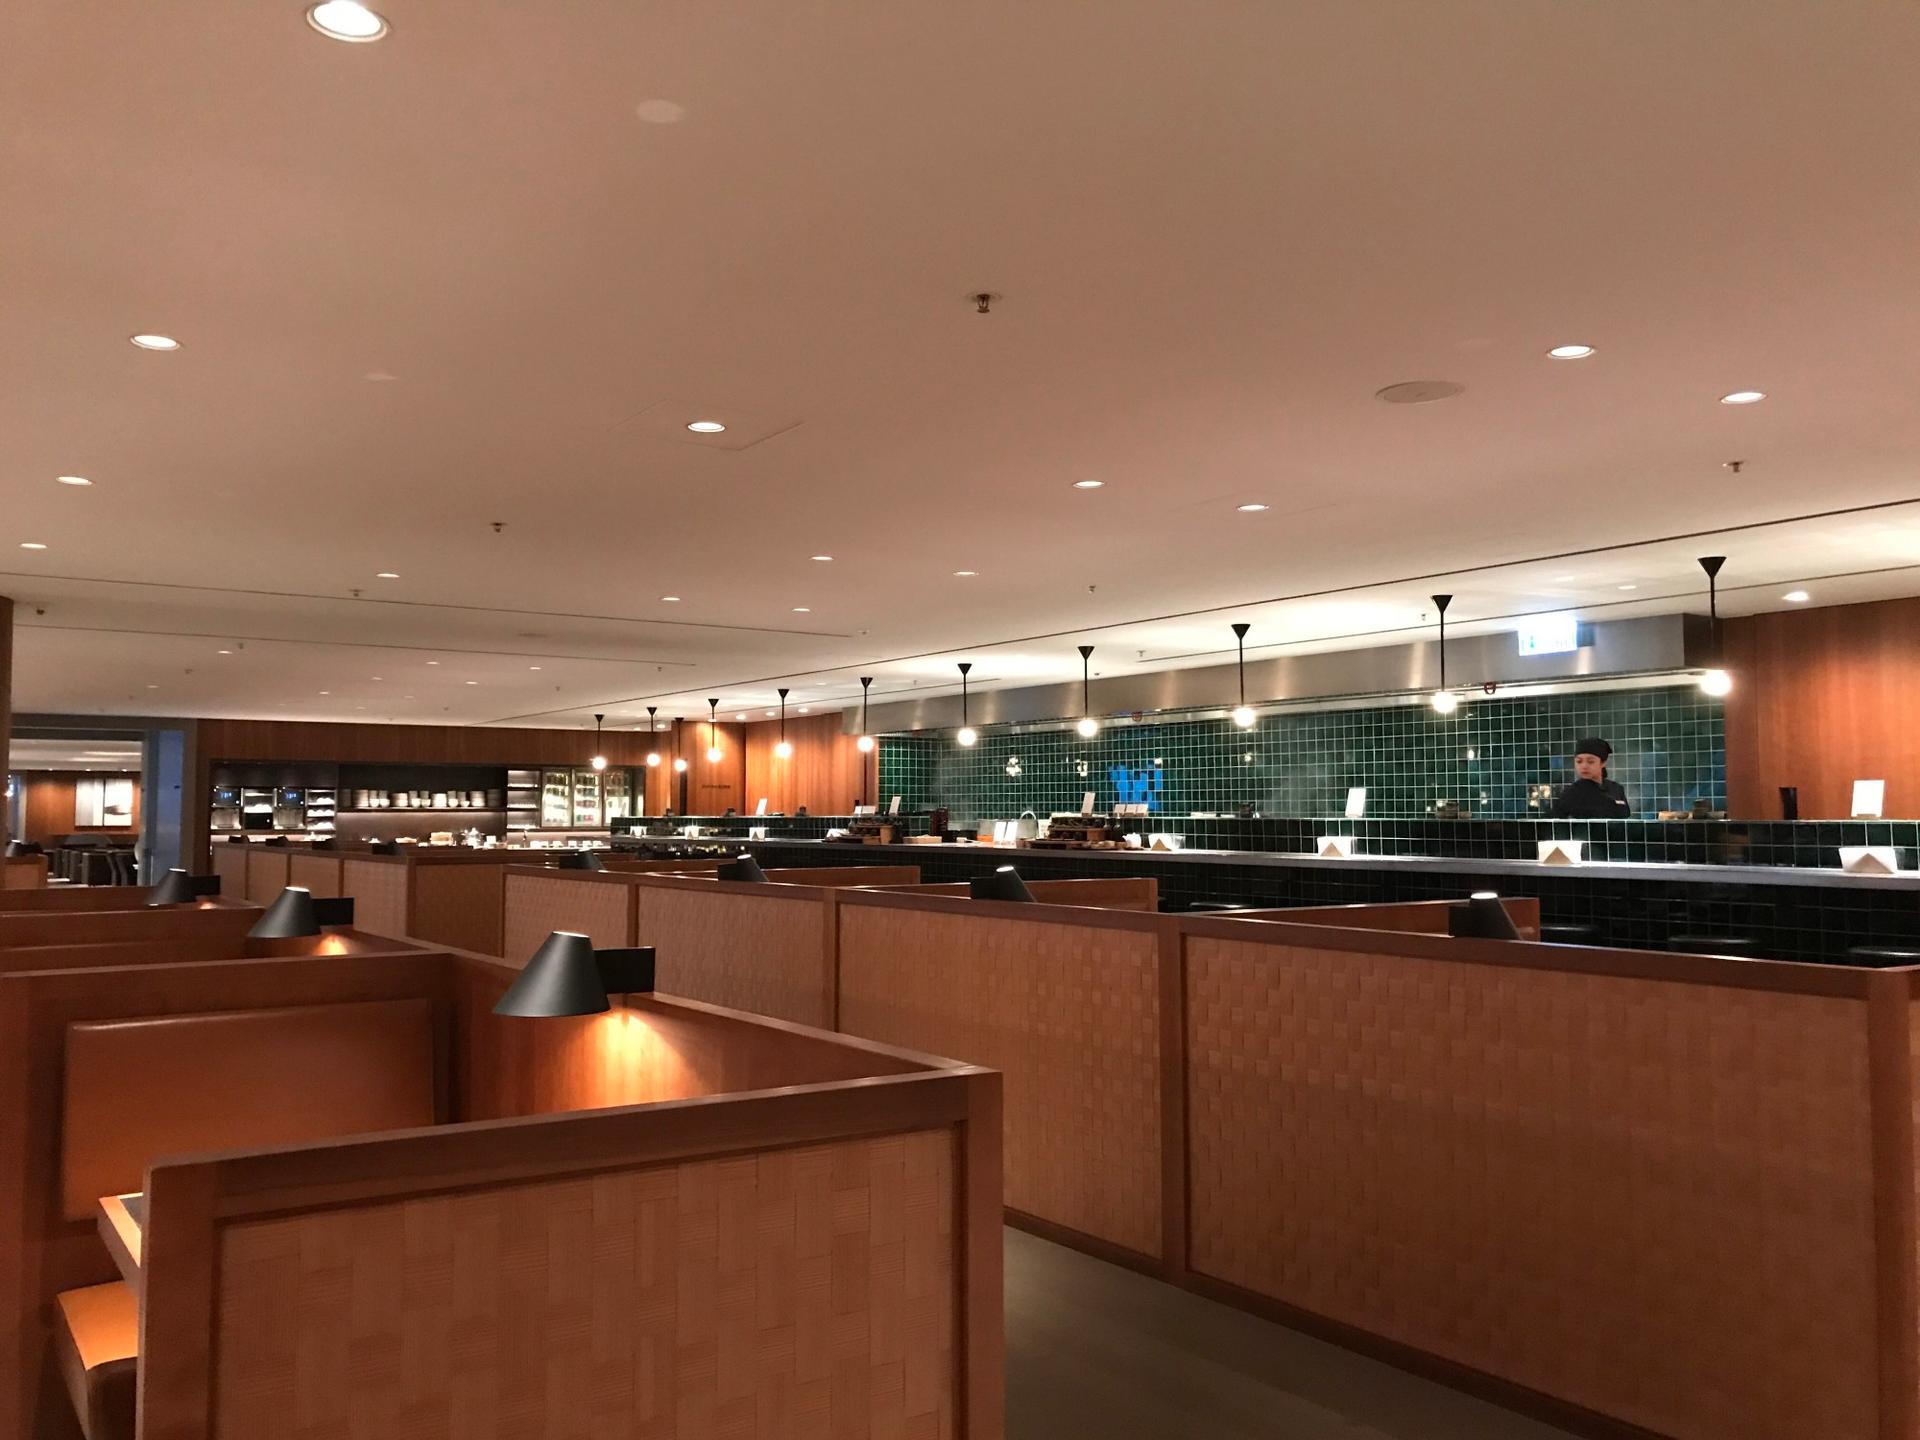 Cathay Pacific The Pier Business Class Lounge image 44 of 61